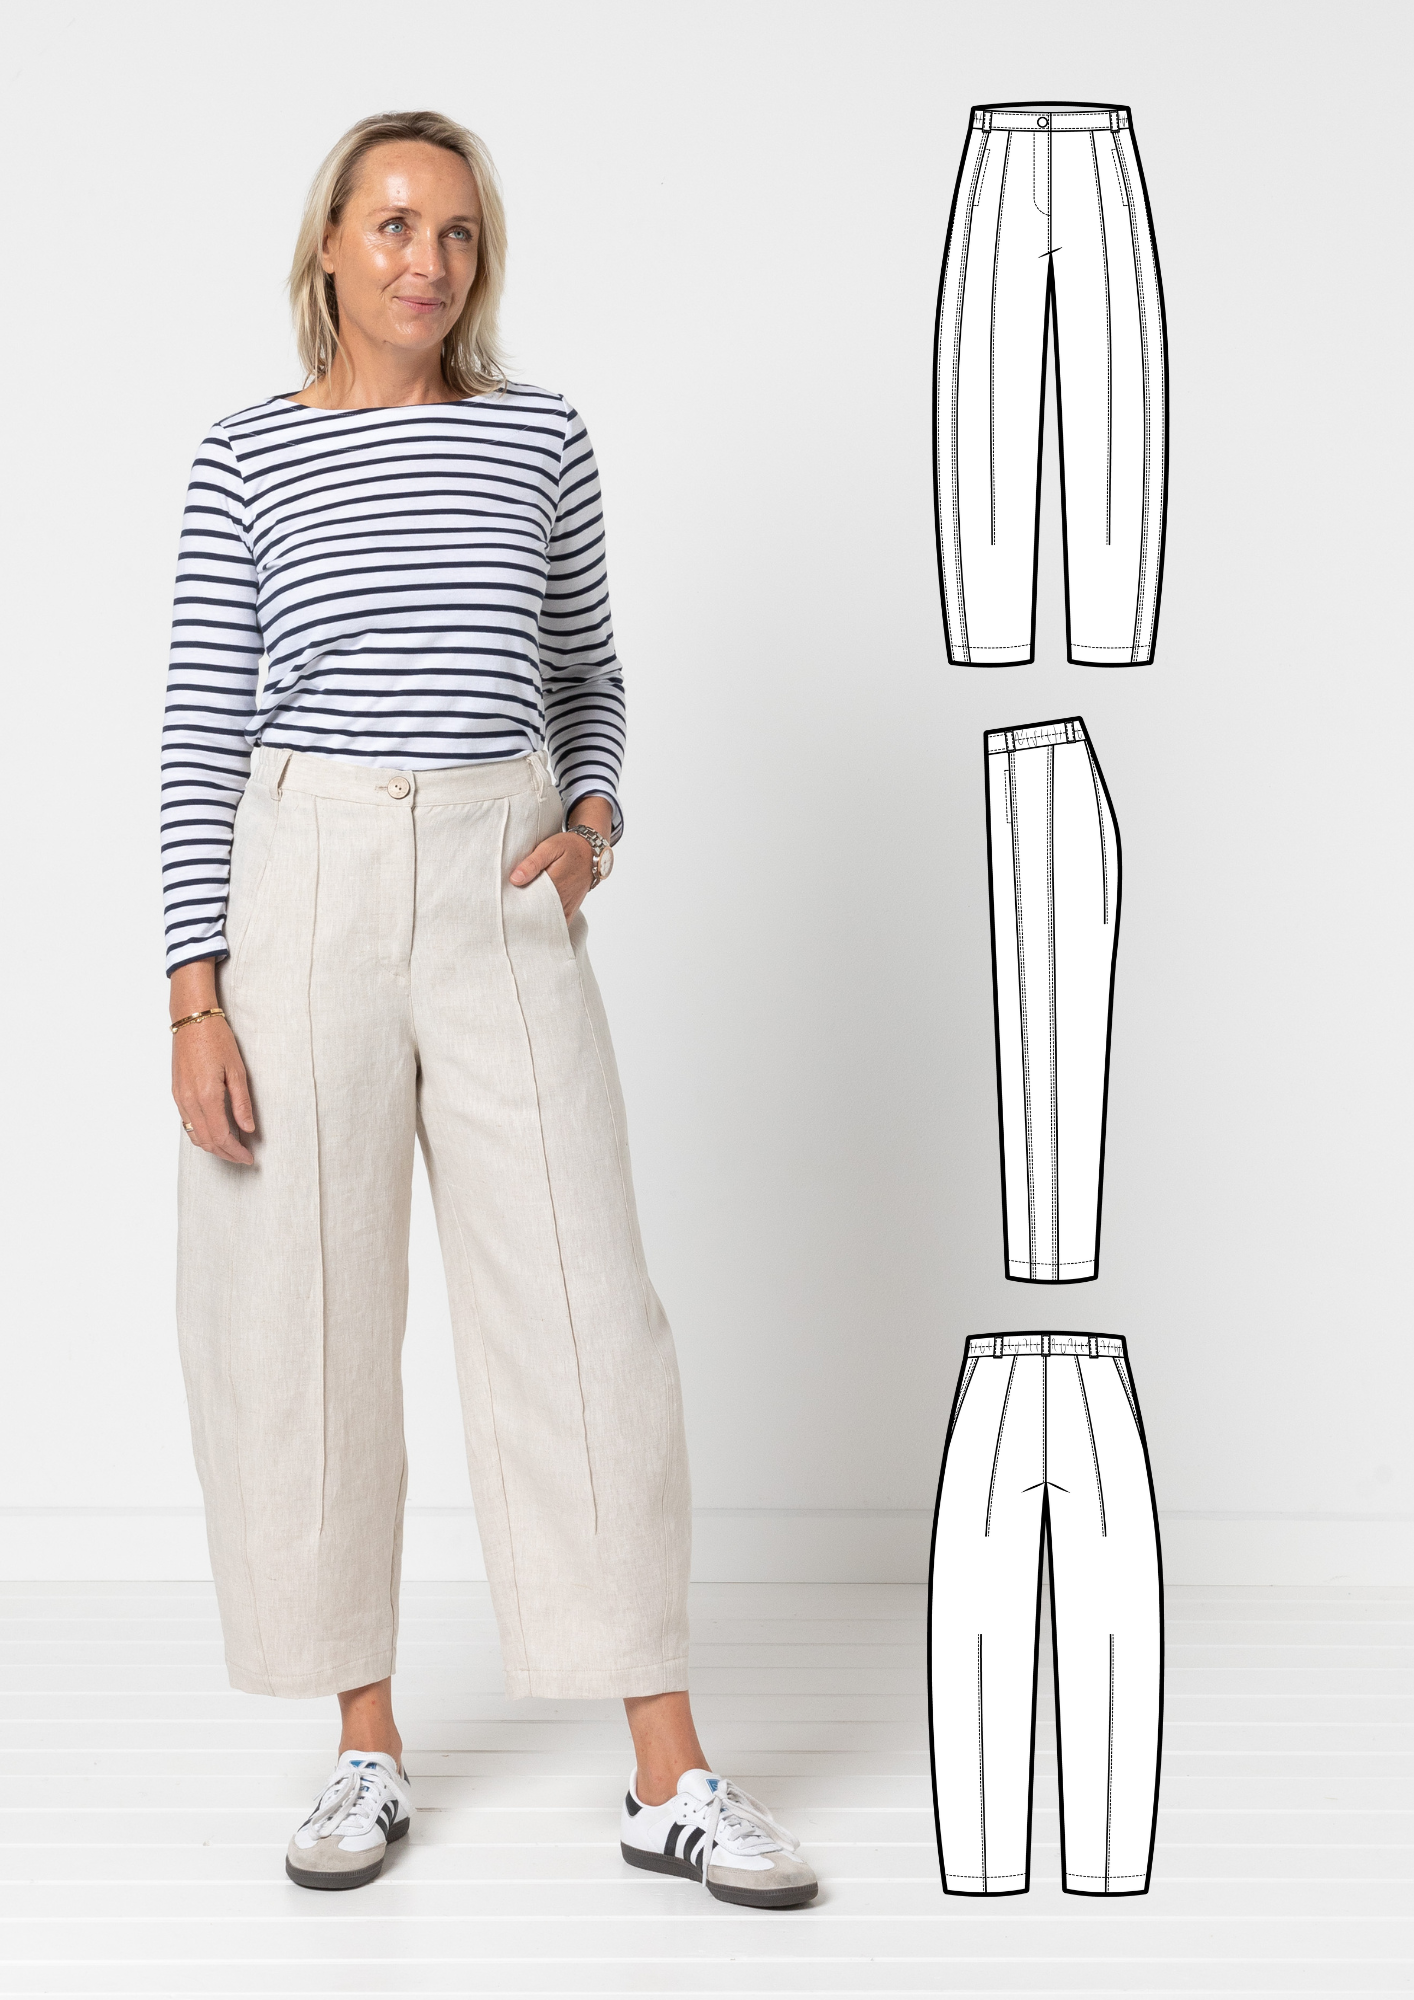 Twig Woven Pant Details